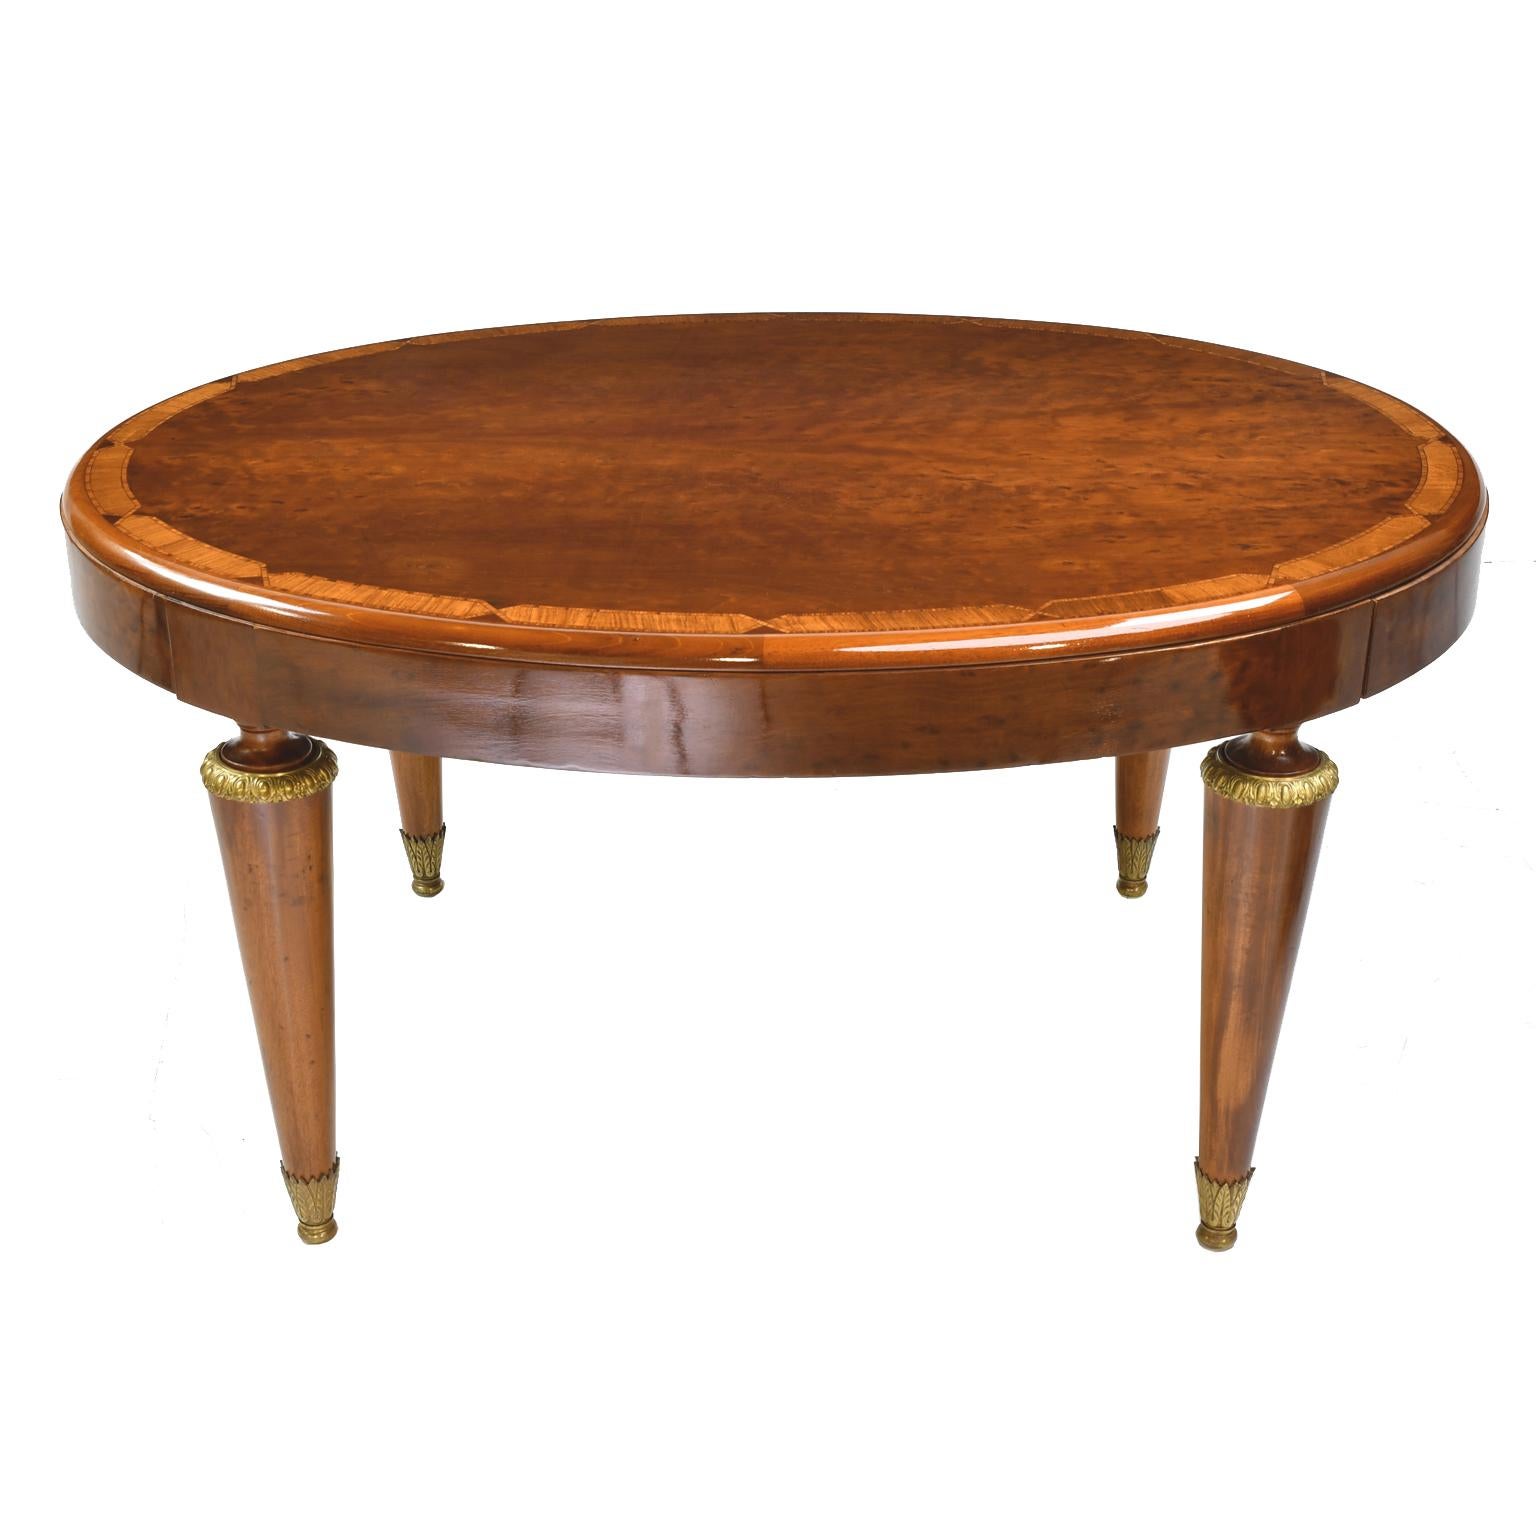 Early 20th Century Antique European Art Deco Oval Dining Table in Polished Mahogany and Maple